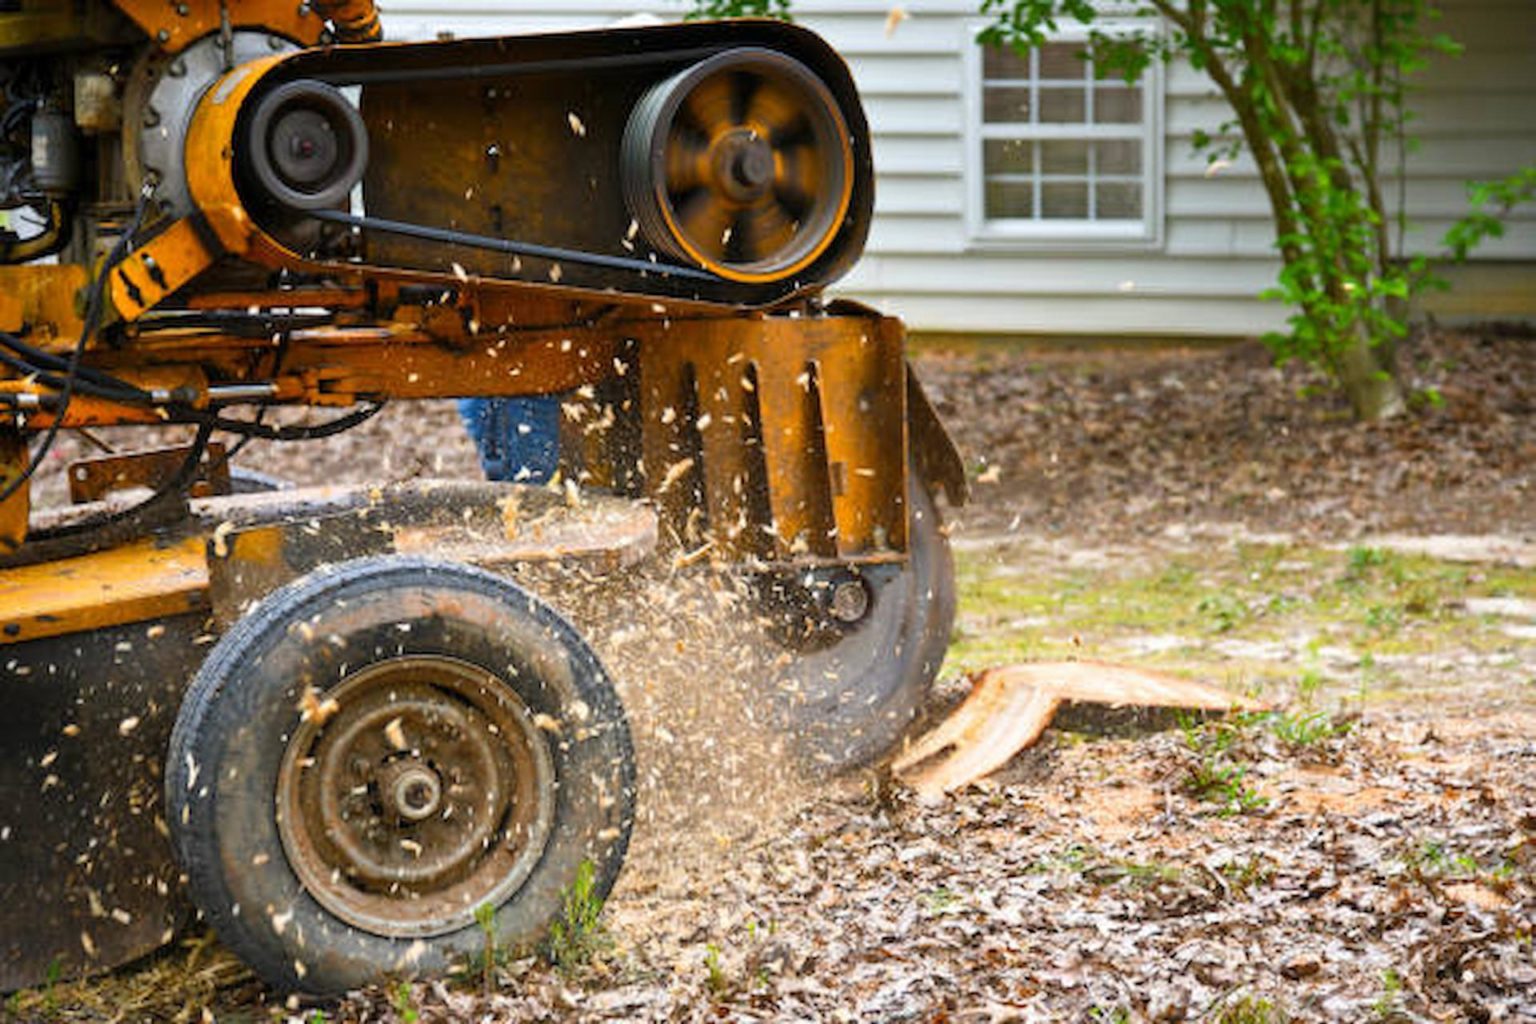 Stump Grinding machine, Affordable stump grinding in chevy chase MD